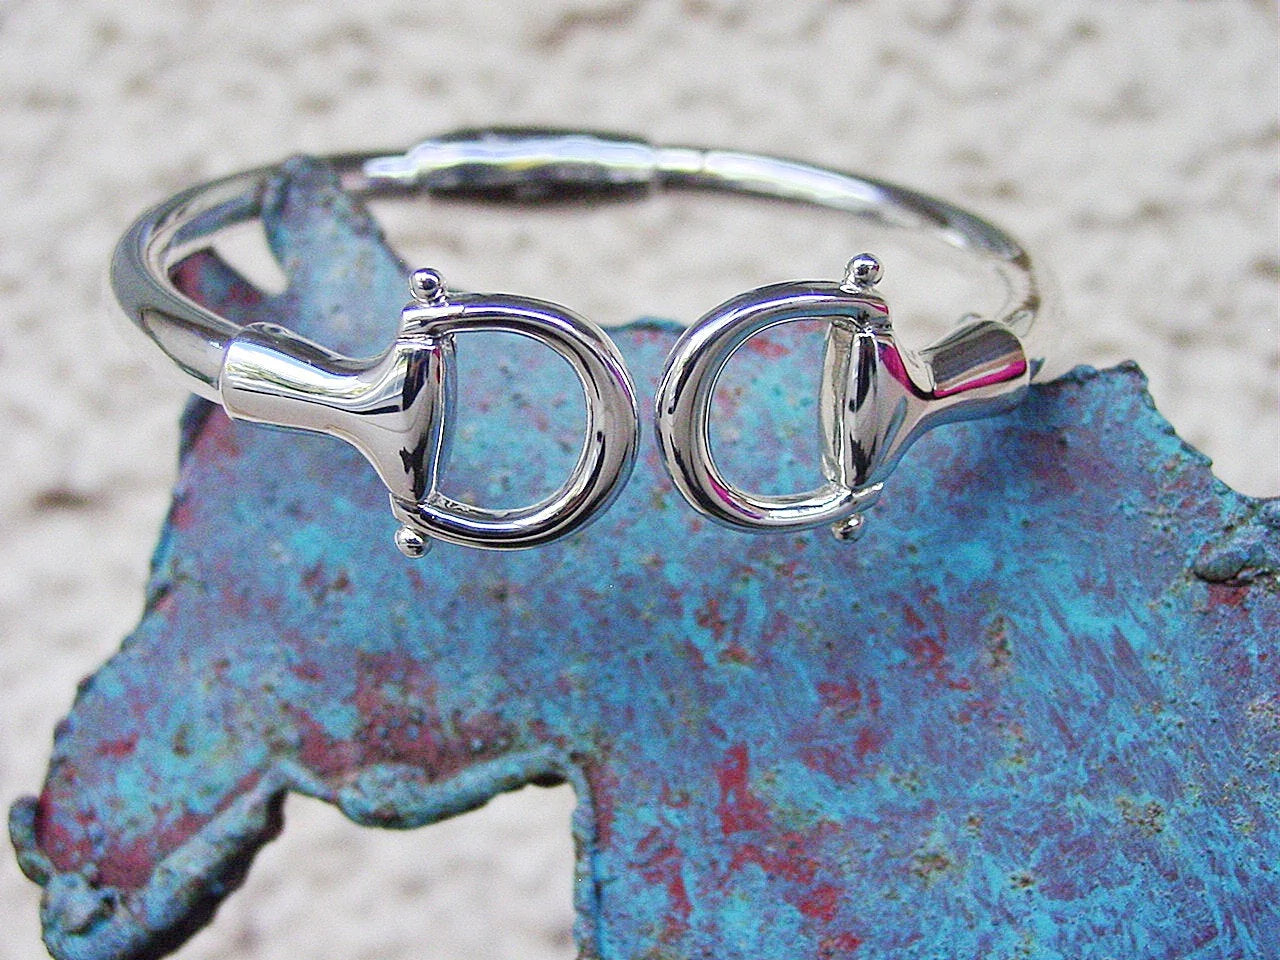 Sterling Silver Snaffle Bit Bangle with Spring Hinge